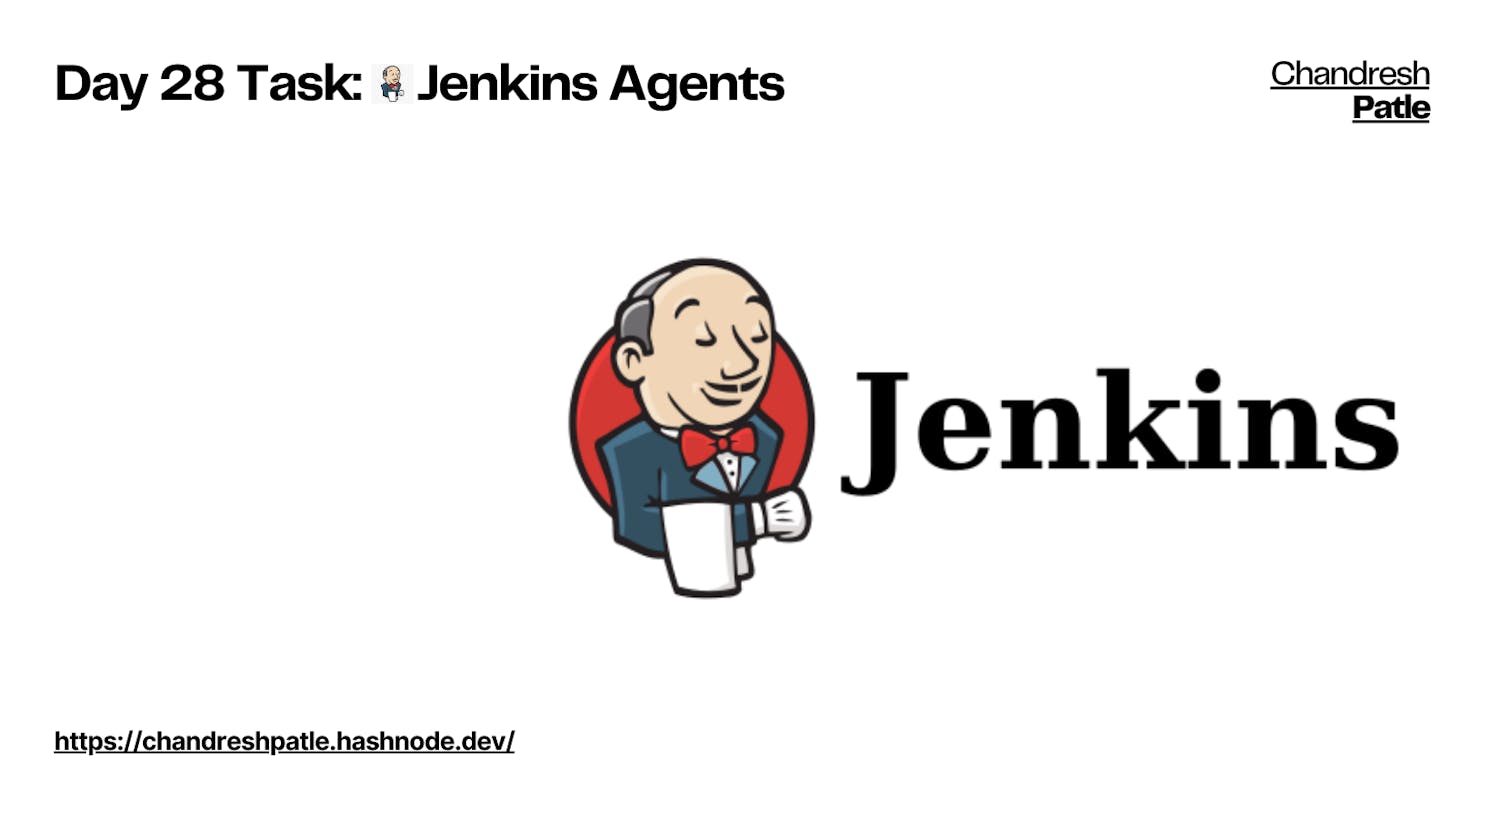 Day 28 Task: Jenkins Agents